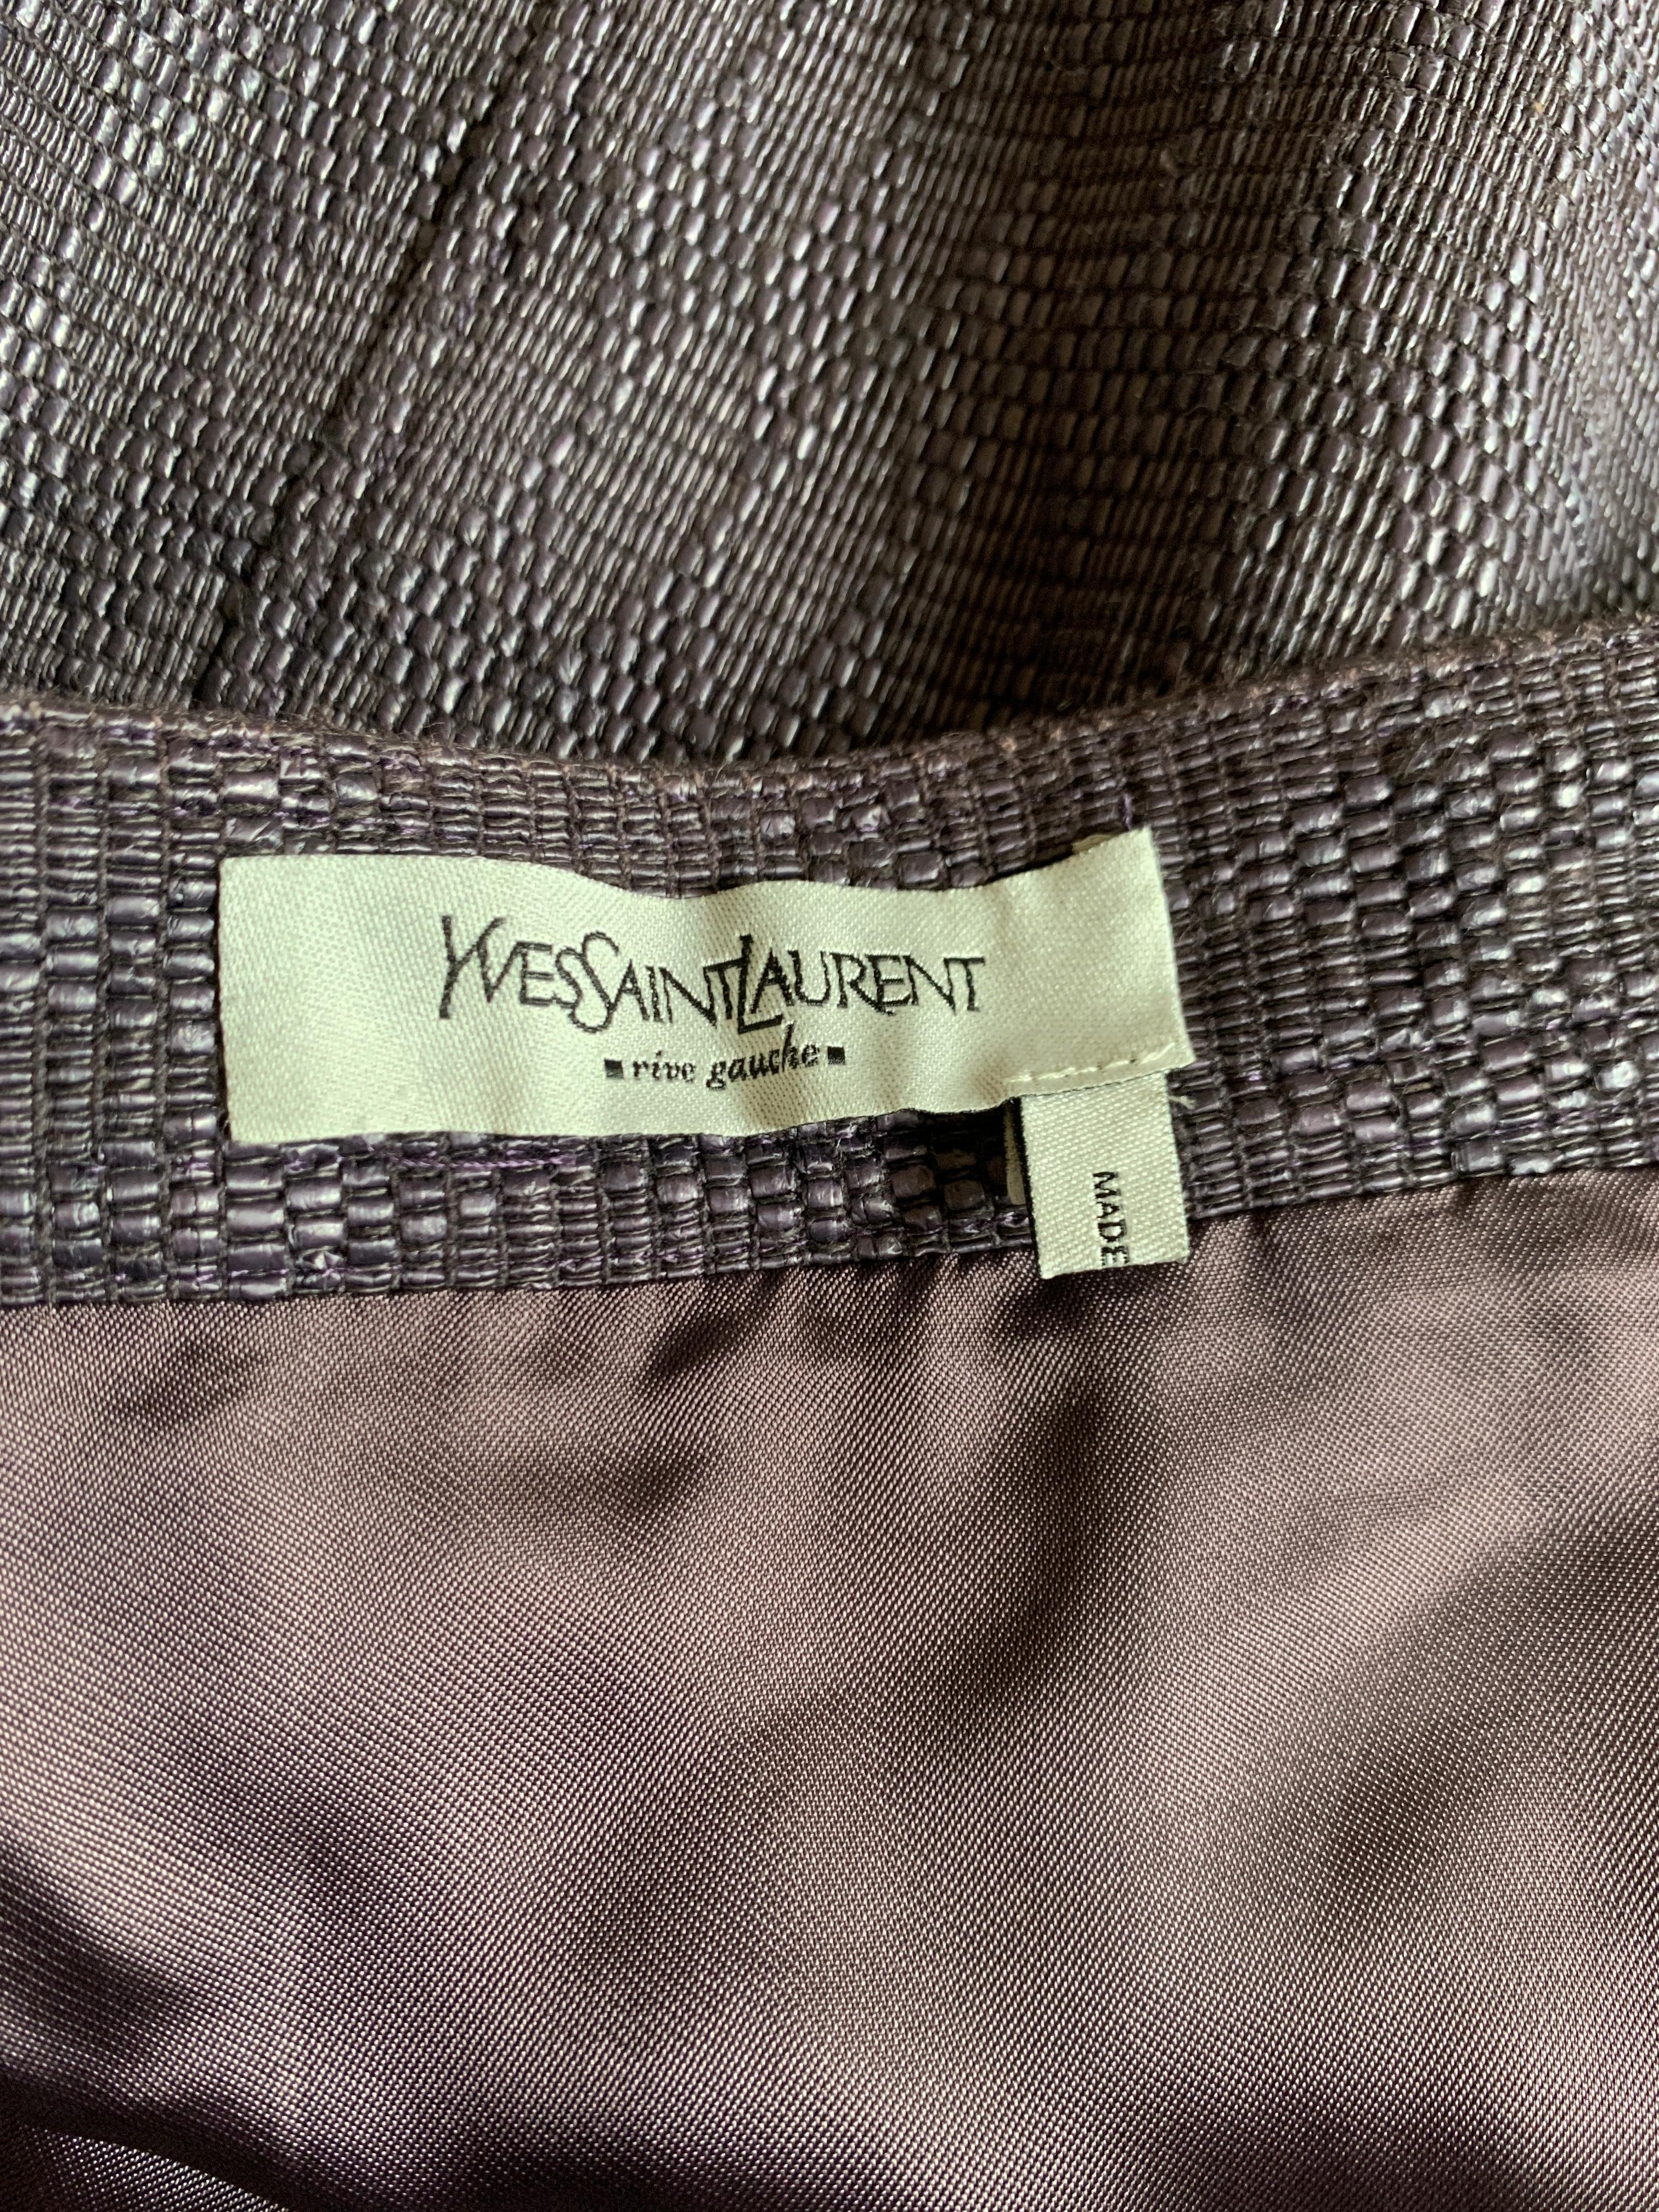 2000s Yves Saint Laurent Rive Gauche Purple Diamond Weave Pencil Skirt In Good Condition For Sale In San Francisco, CA